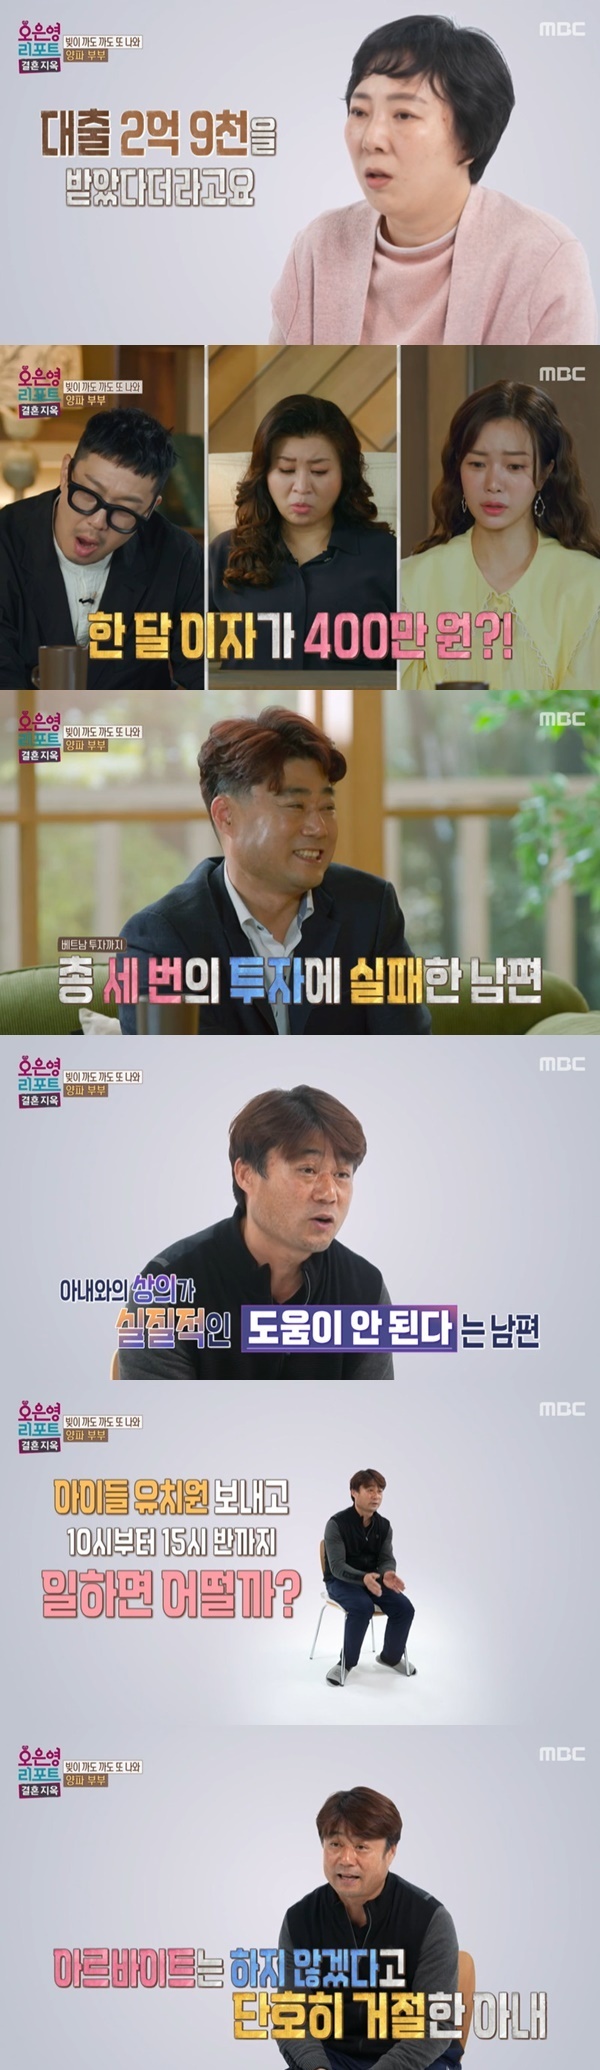 Husband, who owes 500 million to Wife secretly, complained that Wife did not work part time.On May 15, MBC  ⁇  Oh Eun Young Report - marriageHell  ⁇  appeared on Onion Couple, who raised two children in the 13th year of marriage.Husband was an office equipment rental company and owed Wife about $ 290 million. Wife was worried about divorce because of debt, but Husband said it should not be divorced.Husband did not share the debt transparently.Husband should discuss the reason with Wife when investing, but he does not know internet banking, deposit and withdrawal, etc. He can not distinguish between credit card and check card.I thought that even if I talked about money, I would not be able to help.Wife said, I do not know India. I do not really know. I did not even know it was a subscription. I met my baby dad and married how the subscription was used. I knew nothing.Here Husband says, I think it is difficult for India to make investment wrong.When Alba came in through the acquaintance, I talked to Wife because of Alba at night, up during the day, tug-of-war, and three jobs, but Debt keeps increasing.Why do not you work from 10 to 15:30 when you spend your babys kindergarten? I did not want to eat Alba. India is getting harder, but Wife complains that there is no shake at all.When Haha asked me how I got such a big debt, Husband said, I have to have an original investment, but I got Loans and got rid of it. If I collect the principal, there is no problem.Explained that interest was added to the debt.Husband has  ⁇  100 million Debt, and 190 million is set as an individual, so the interest rate is high. Monthly interest went over (4 million won). The land died when my father was seven years old.One male and five female, my sisters gave me a concession to my sister, so I told her that I borrowed money from the land as collateral.